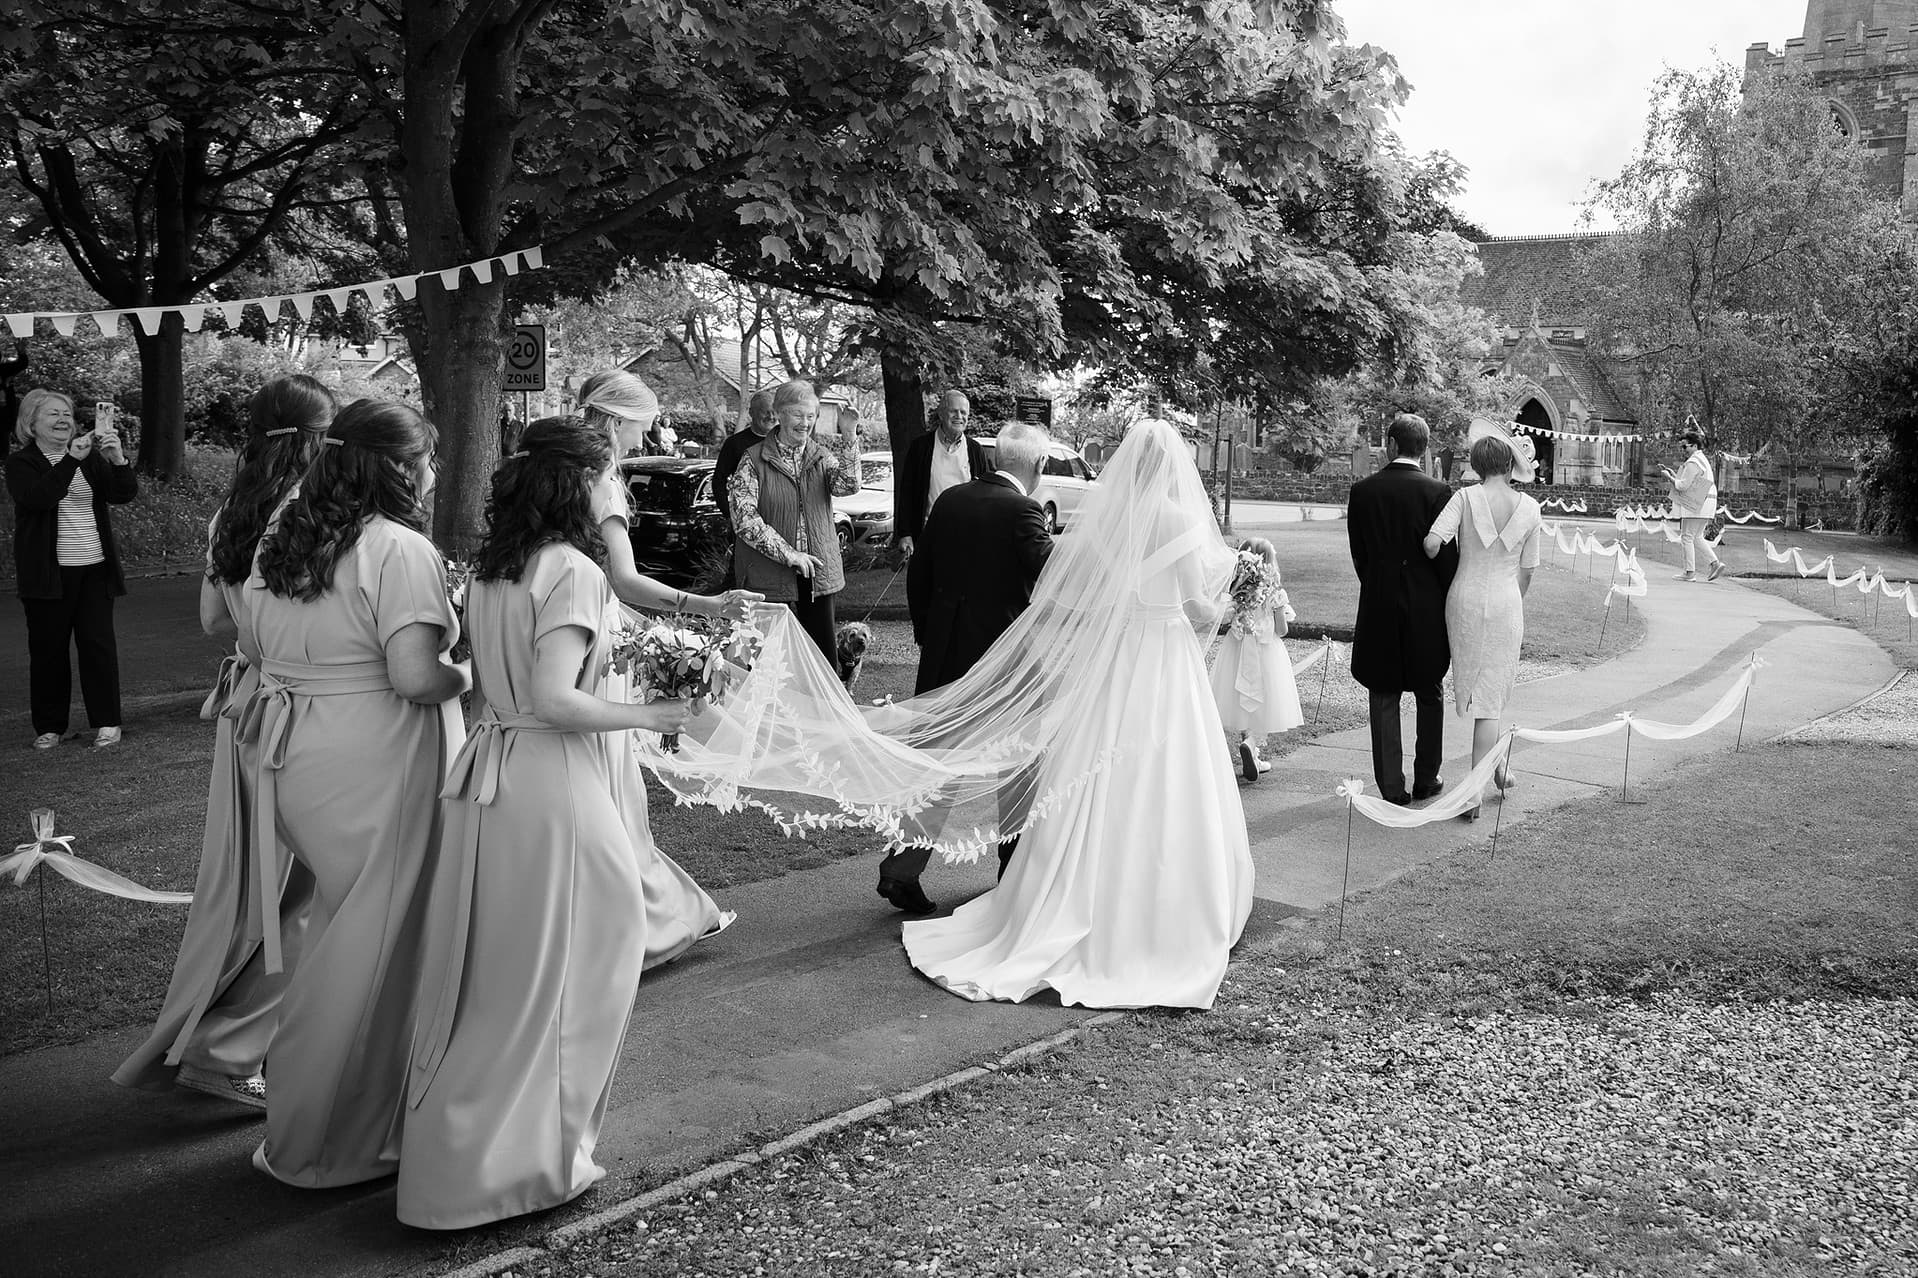 The bride and her entourage walking towards St Catharine's church in Houghton on the Hill